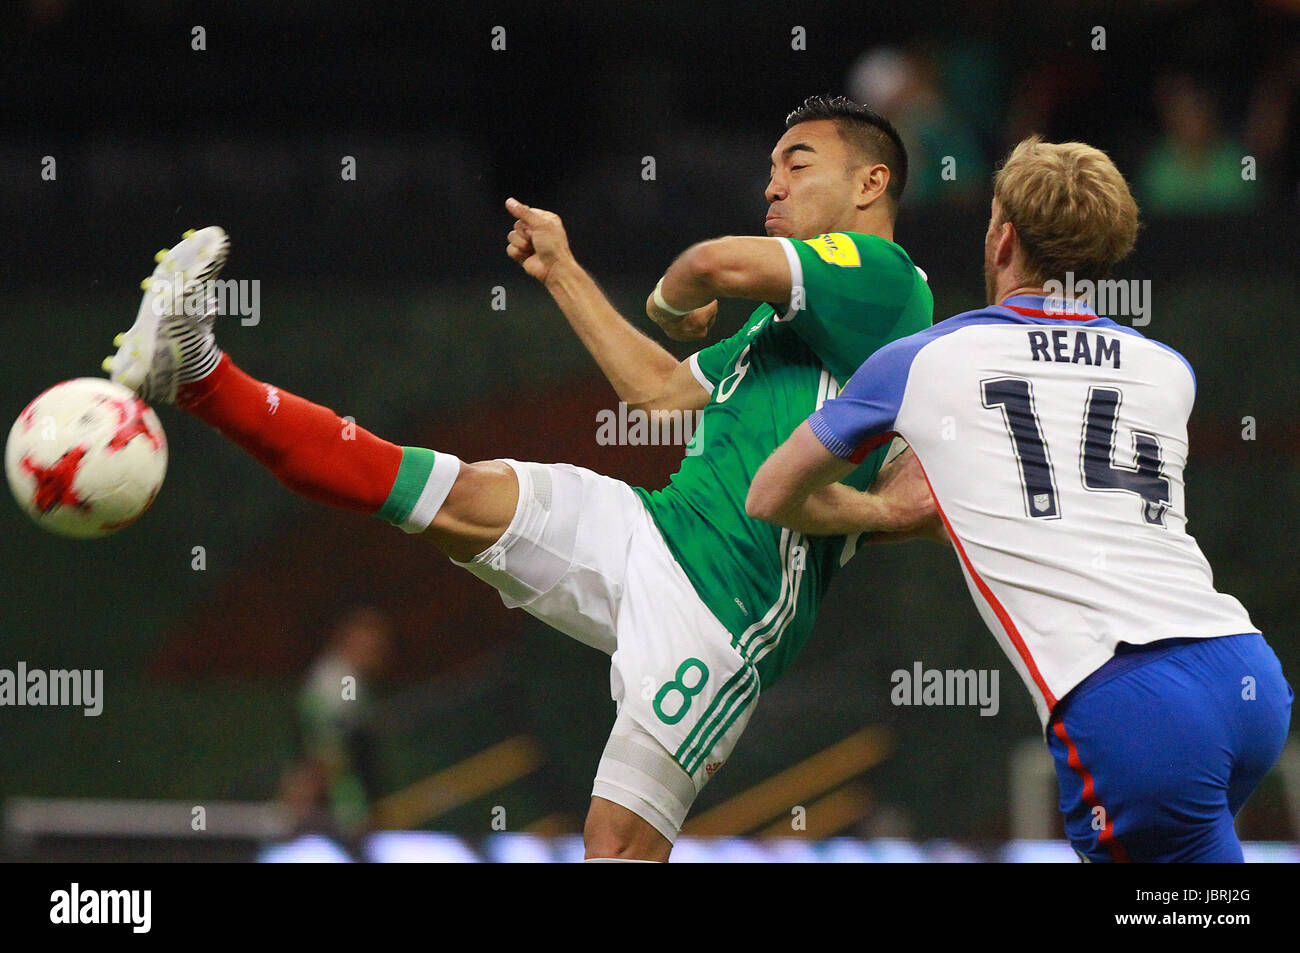 Mexico City, Mexico. 11th June, 2017. Mexico's Marco Fabian (L) vies for the ball during a World Cup soccer qualifying match against United States, in the Azteca Stadium, in Mexico City, capital of Mexico, on June 11, 2017. The match ended in a 1-1 tie. Credit: Str/Xinhua/Alamy Live News Stock Photo